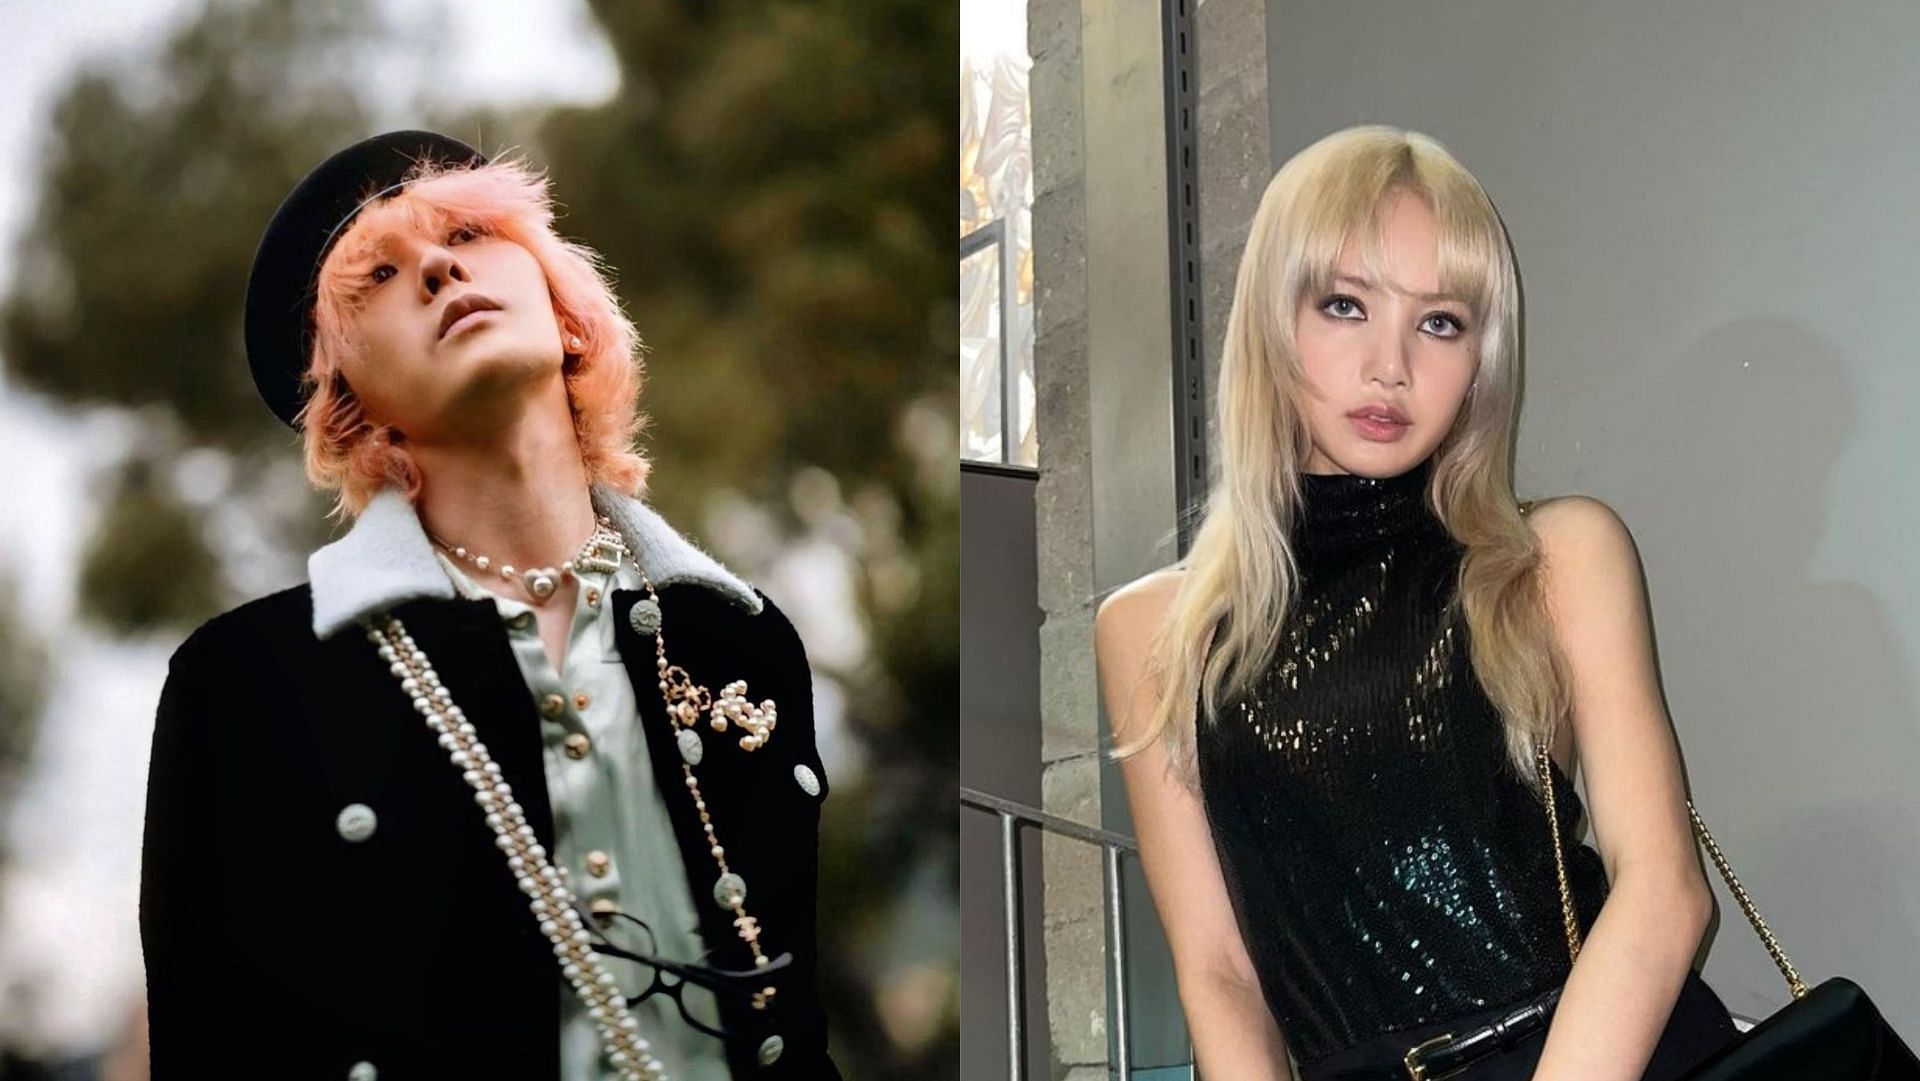 G-Dragon and LISA are two of the most popular K-pop idols in the world (Images via @xxxibgdrgn @lalalalisa_m/Instagram)